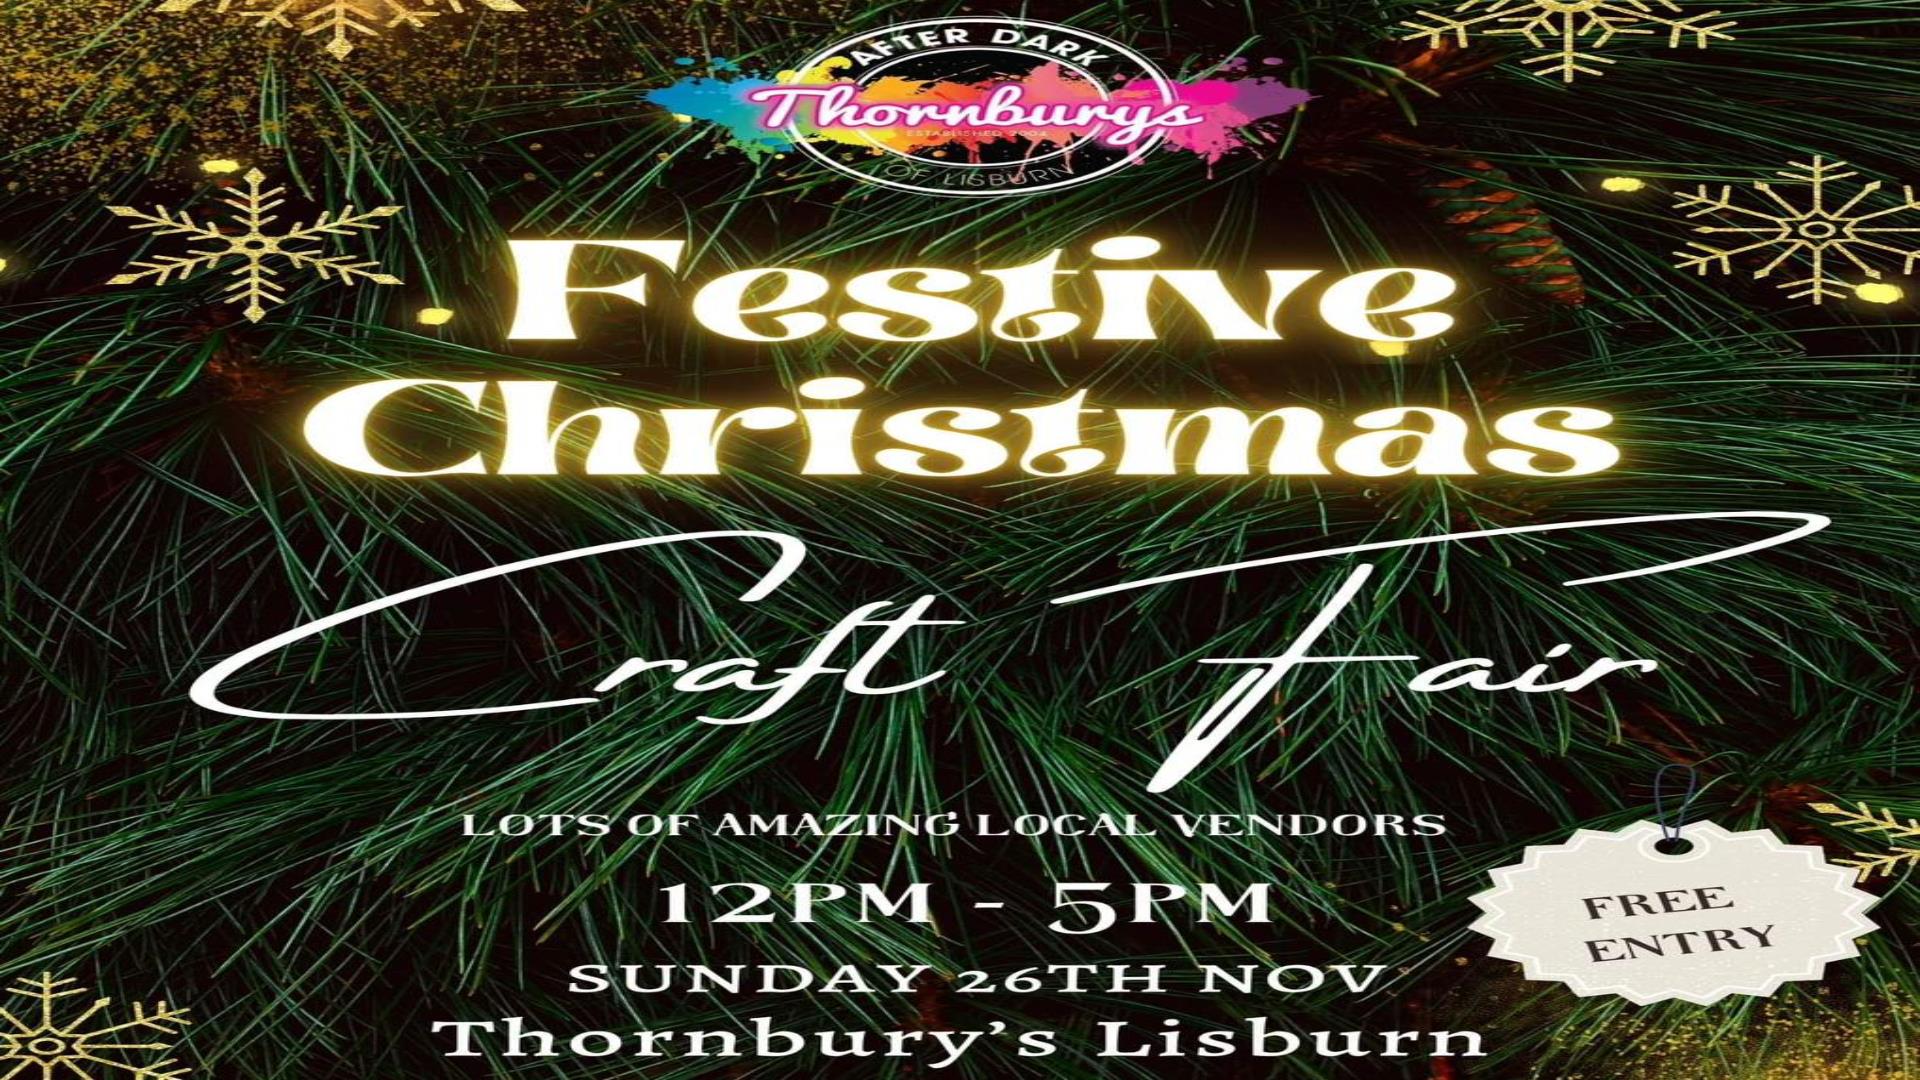 Image is of poster of Thornberry's Festive Craft Fair